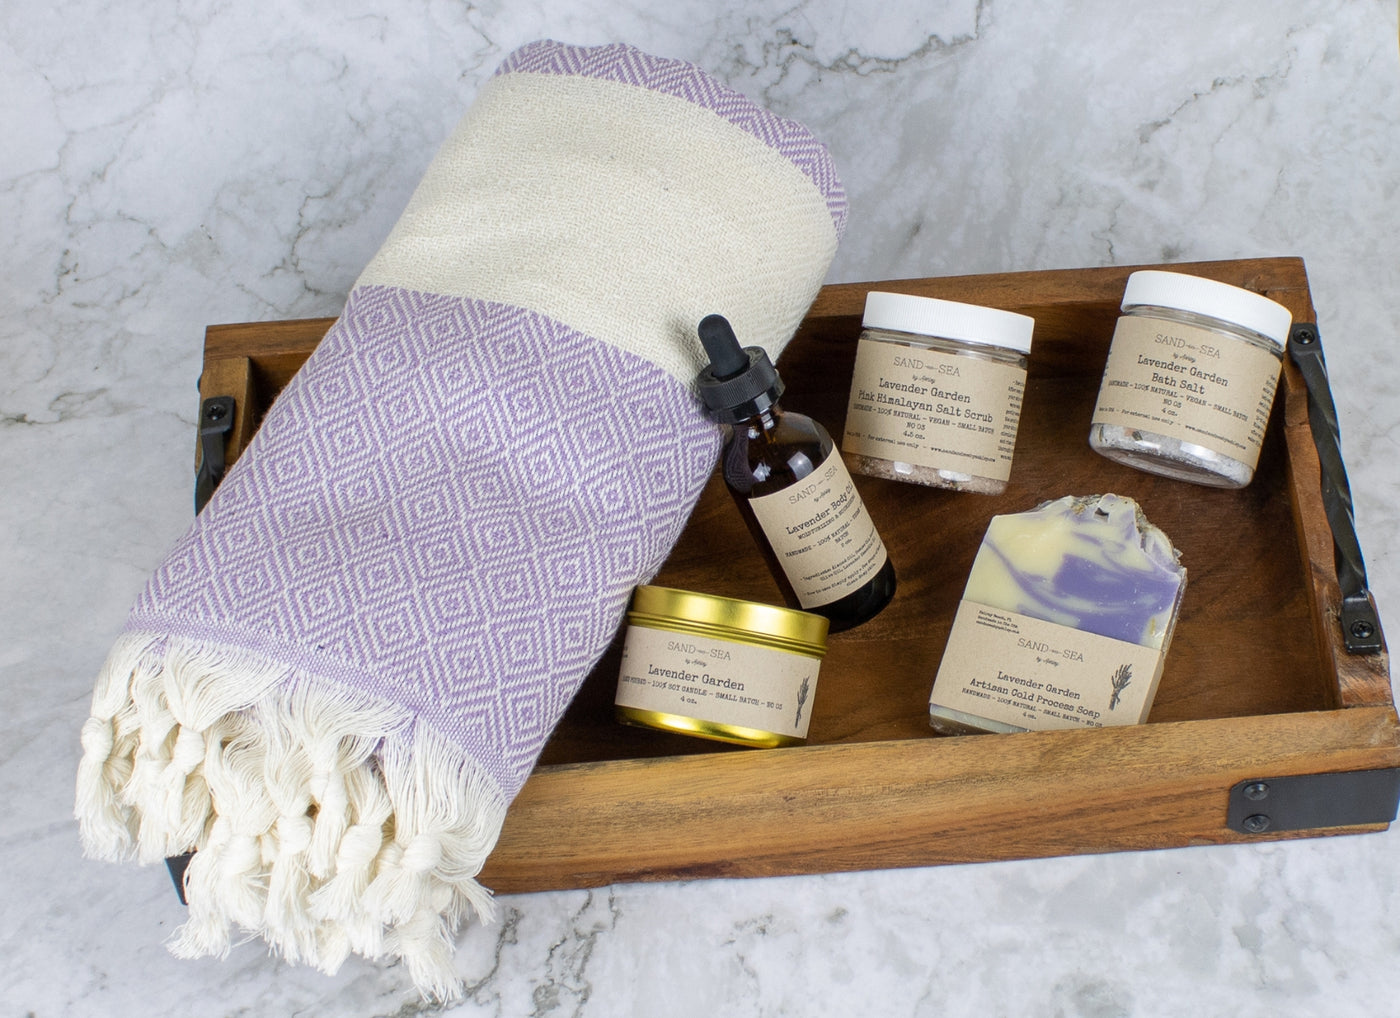 handmade-spa-gift-set-box-basket-with-turkish-beach-towel-lavender-garden-sand-and-sea-by-ashley